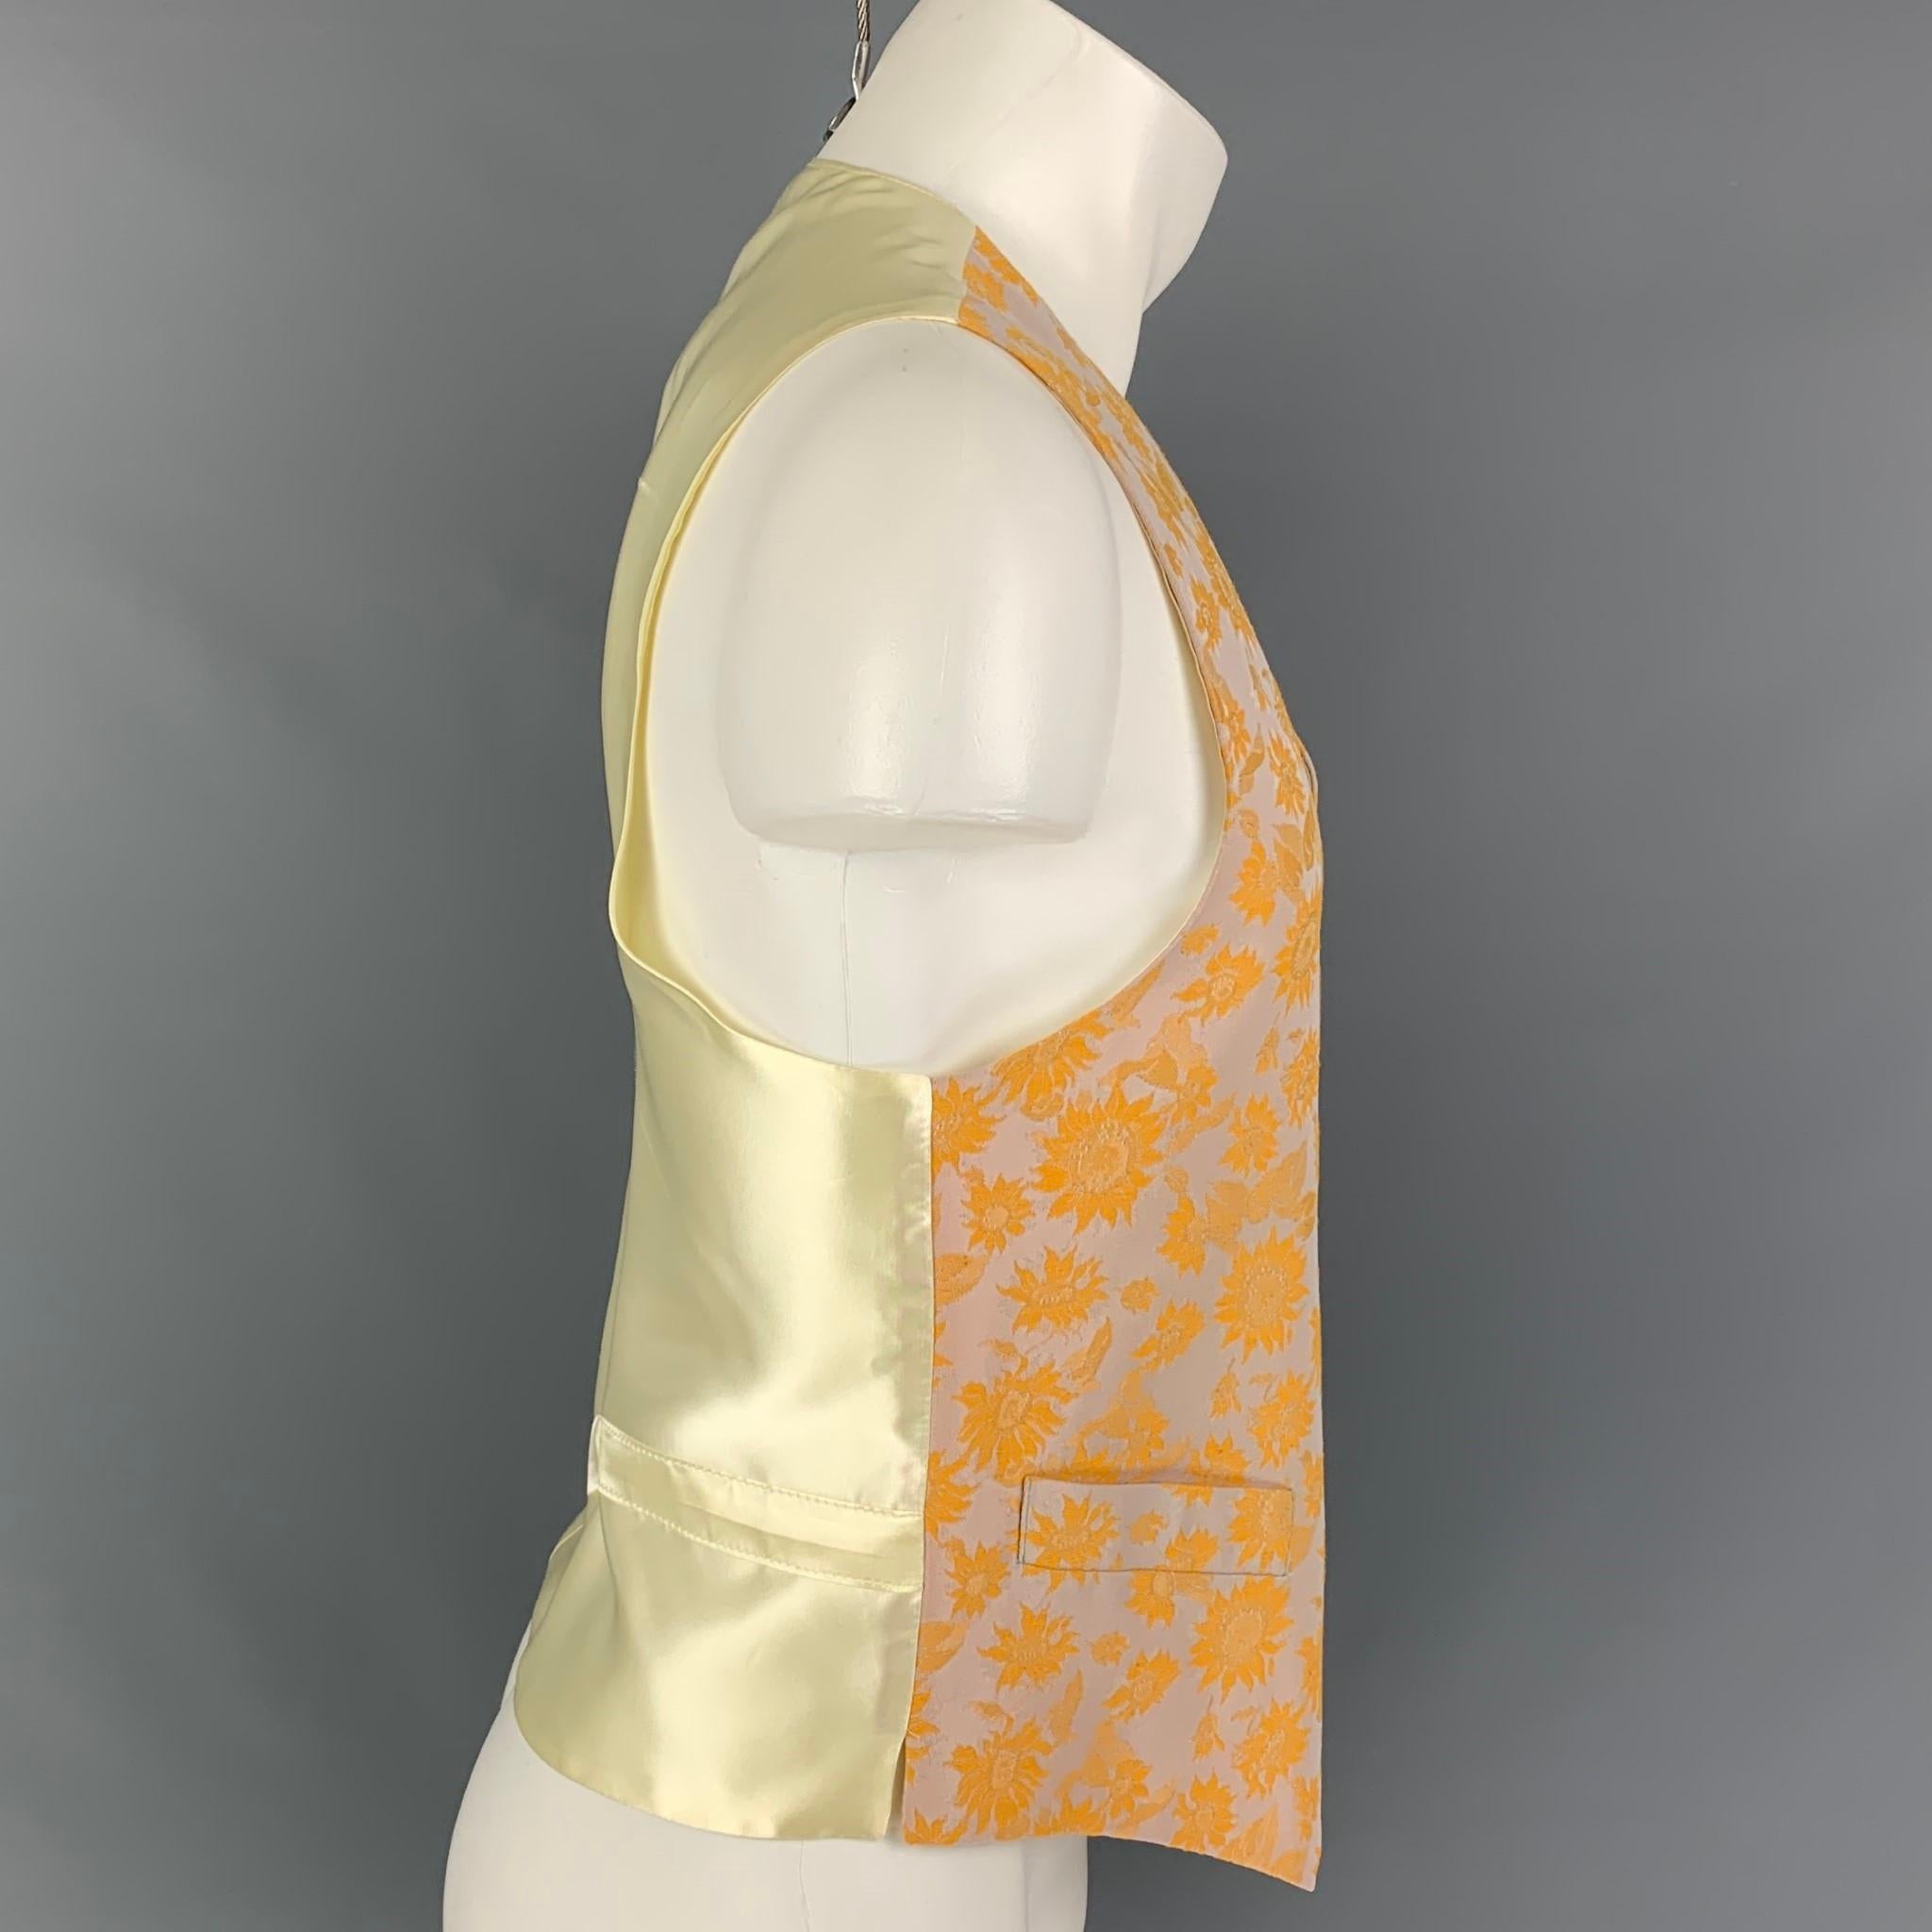 FAVOURBROOK vest comes in a orange & lavender floral print cotton featuring a back belt, front pockets, and a buttoned closure. Made in England. 

Very Good Pre-Owned Condition.
Marked: 42

Measurements:

Shoulder: 14.5 in.
Chest: 42 in.
Length: 22